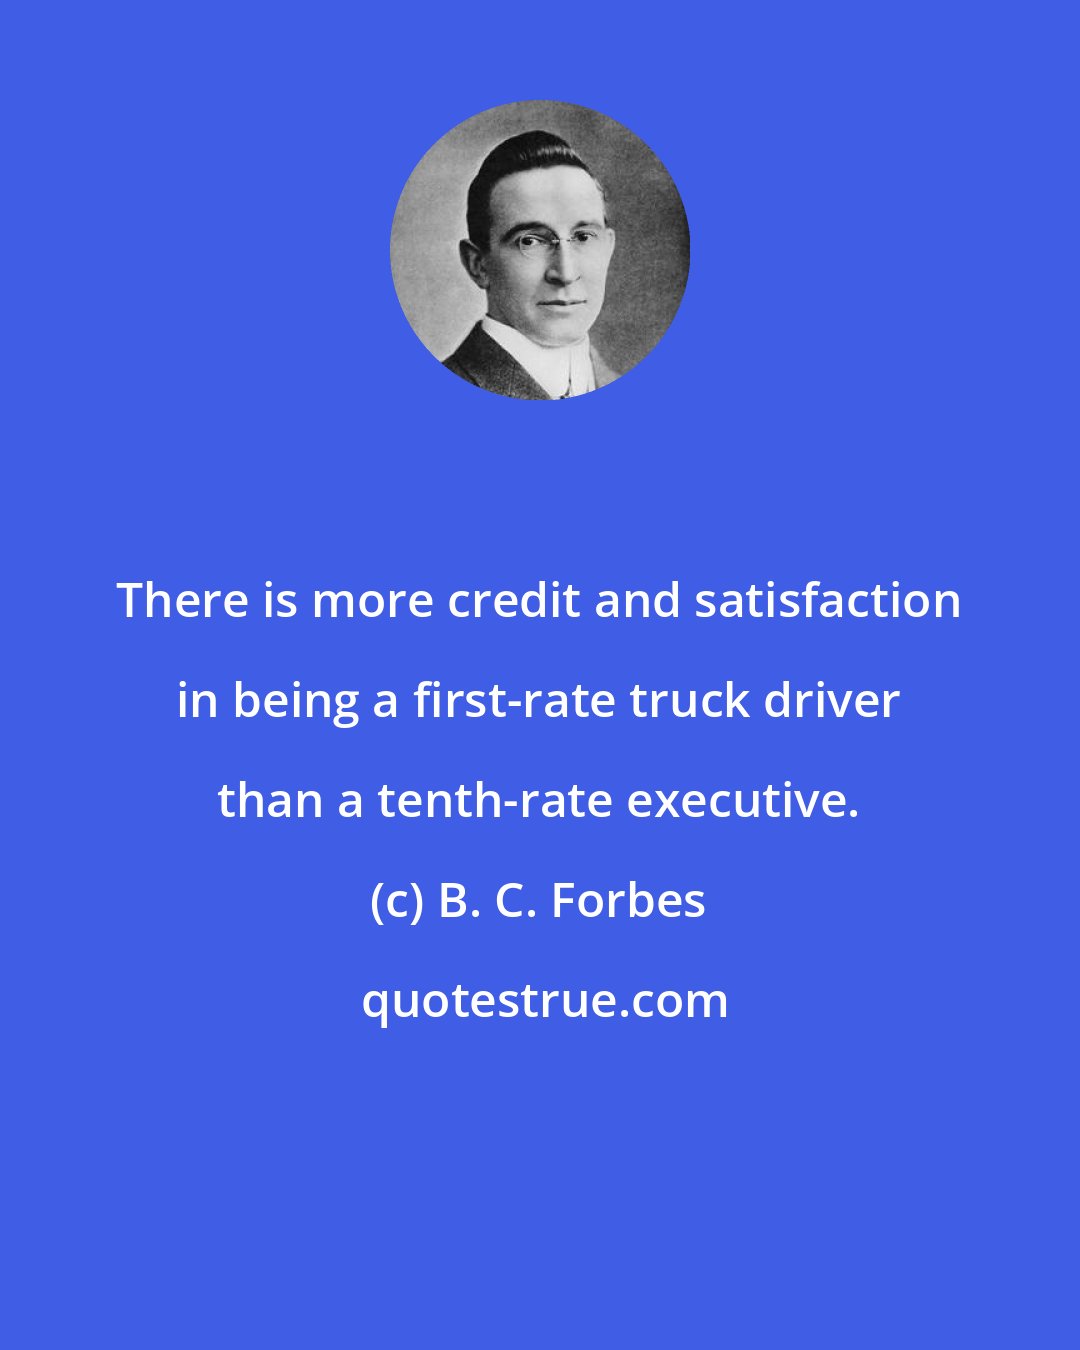 B. C. Forbes: There is more credit and satisfaction in being a first-rate truck driver than a tenth-rate executive.